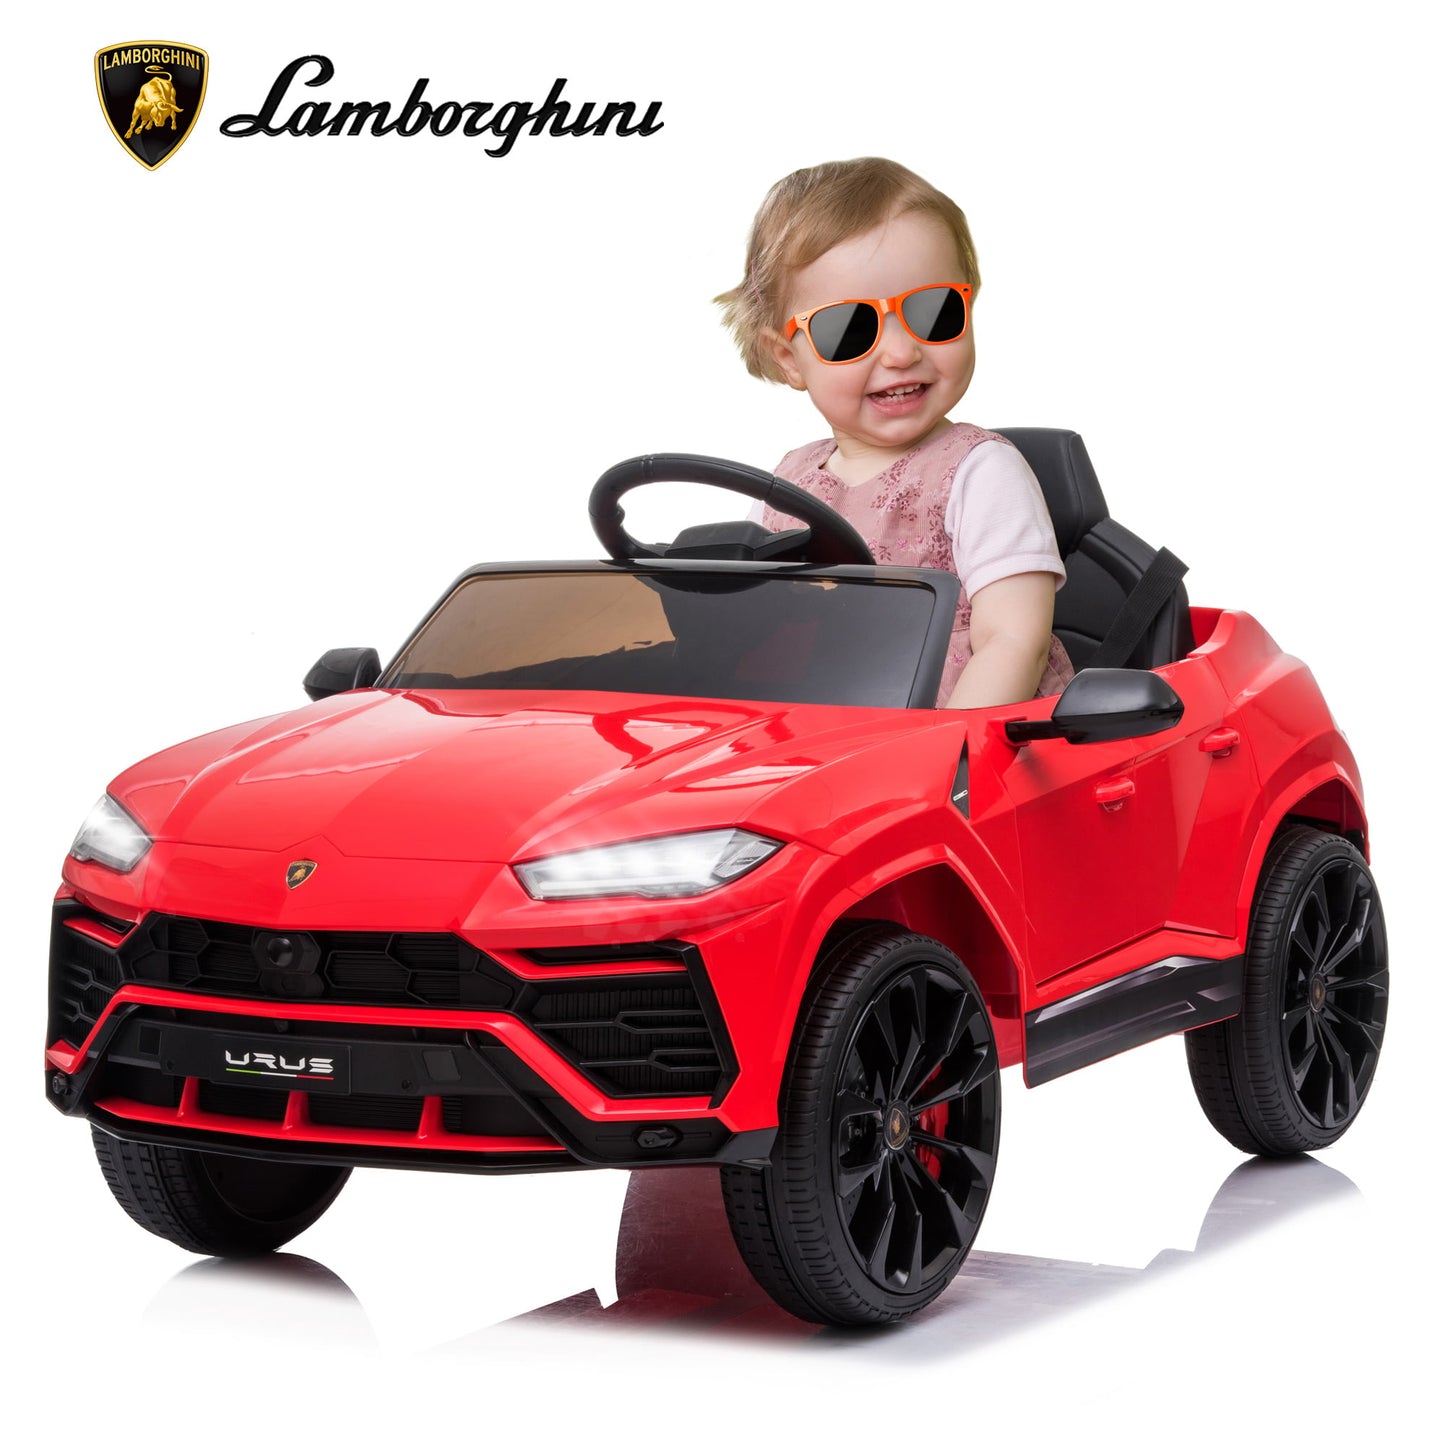 iRerts 12V Kids Ride On Toys Car Electric with Remote Control, Safety Belt, MP3 Player, Horn, LED Headlight for Boys Girls Christmas Gift,Red